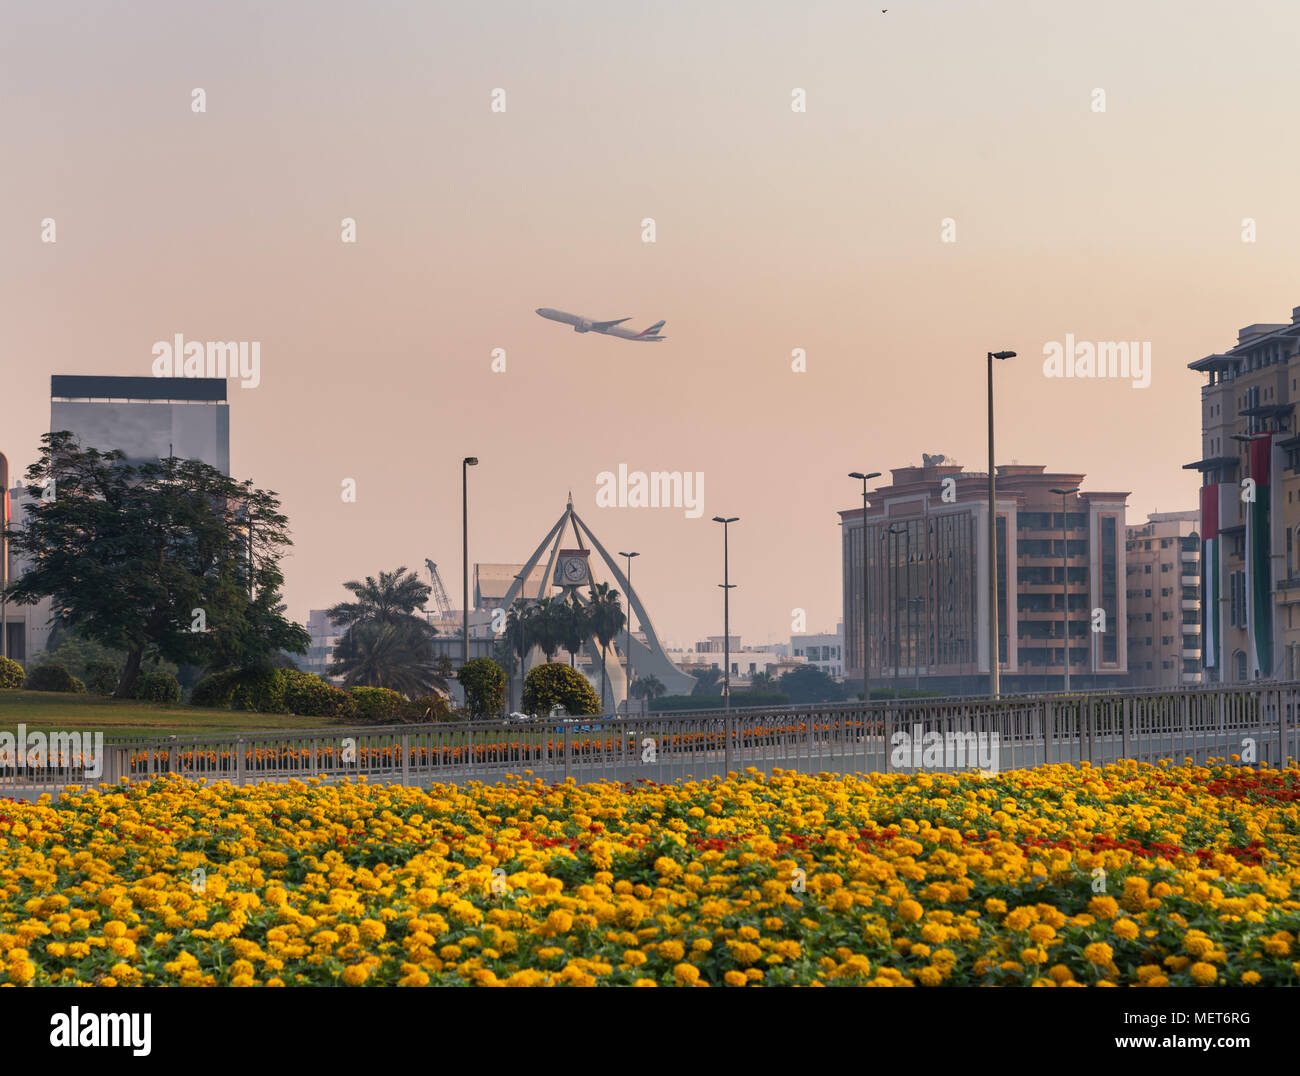 View of yellow flower bed in Deria city centre UAE Stock Photo